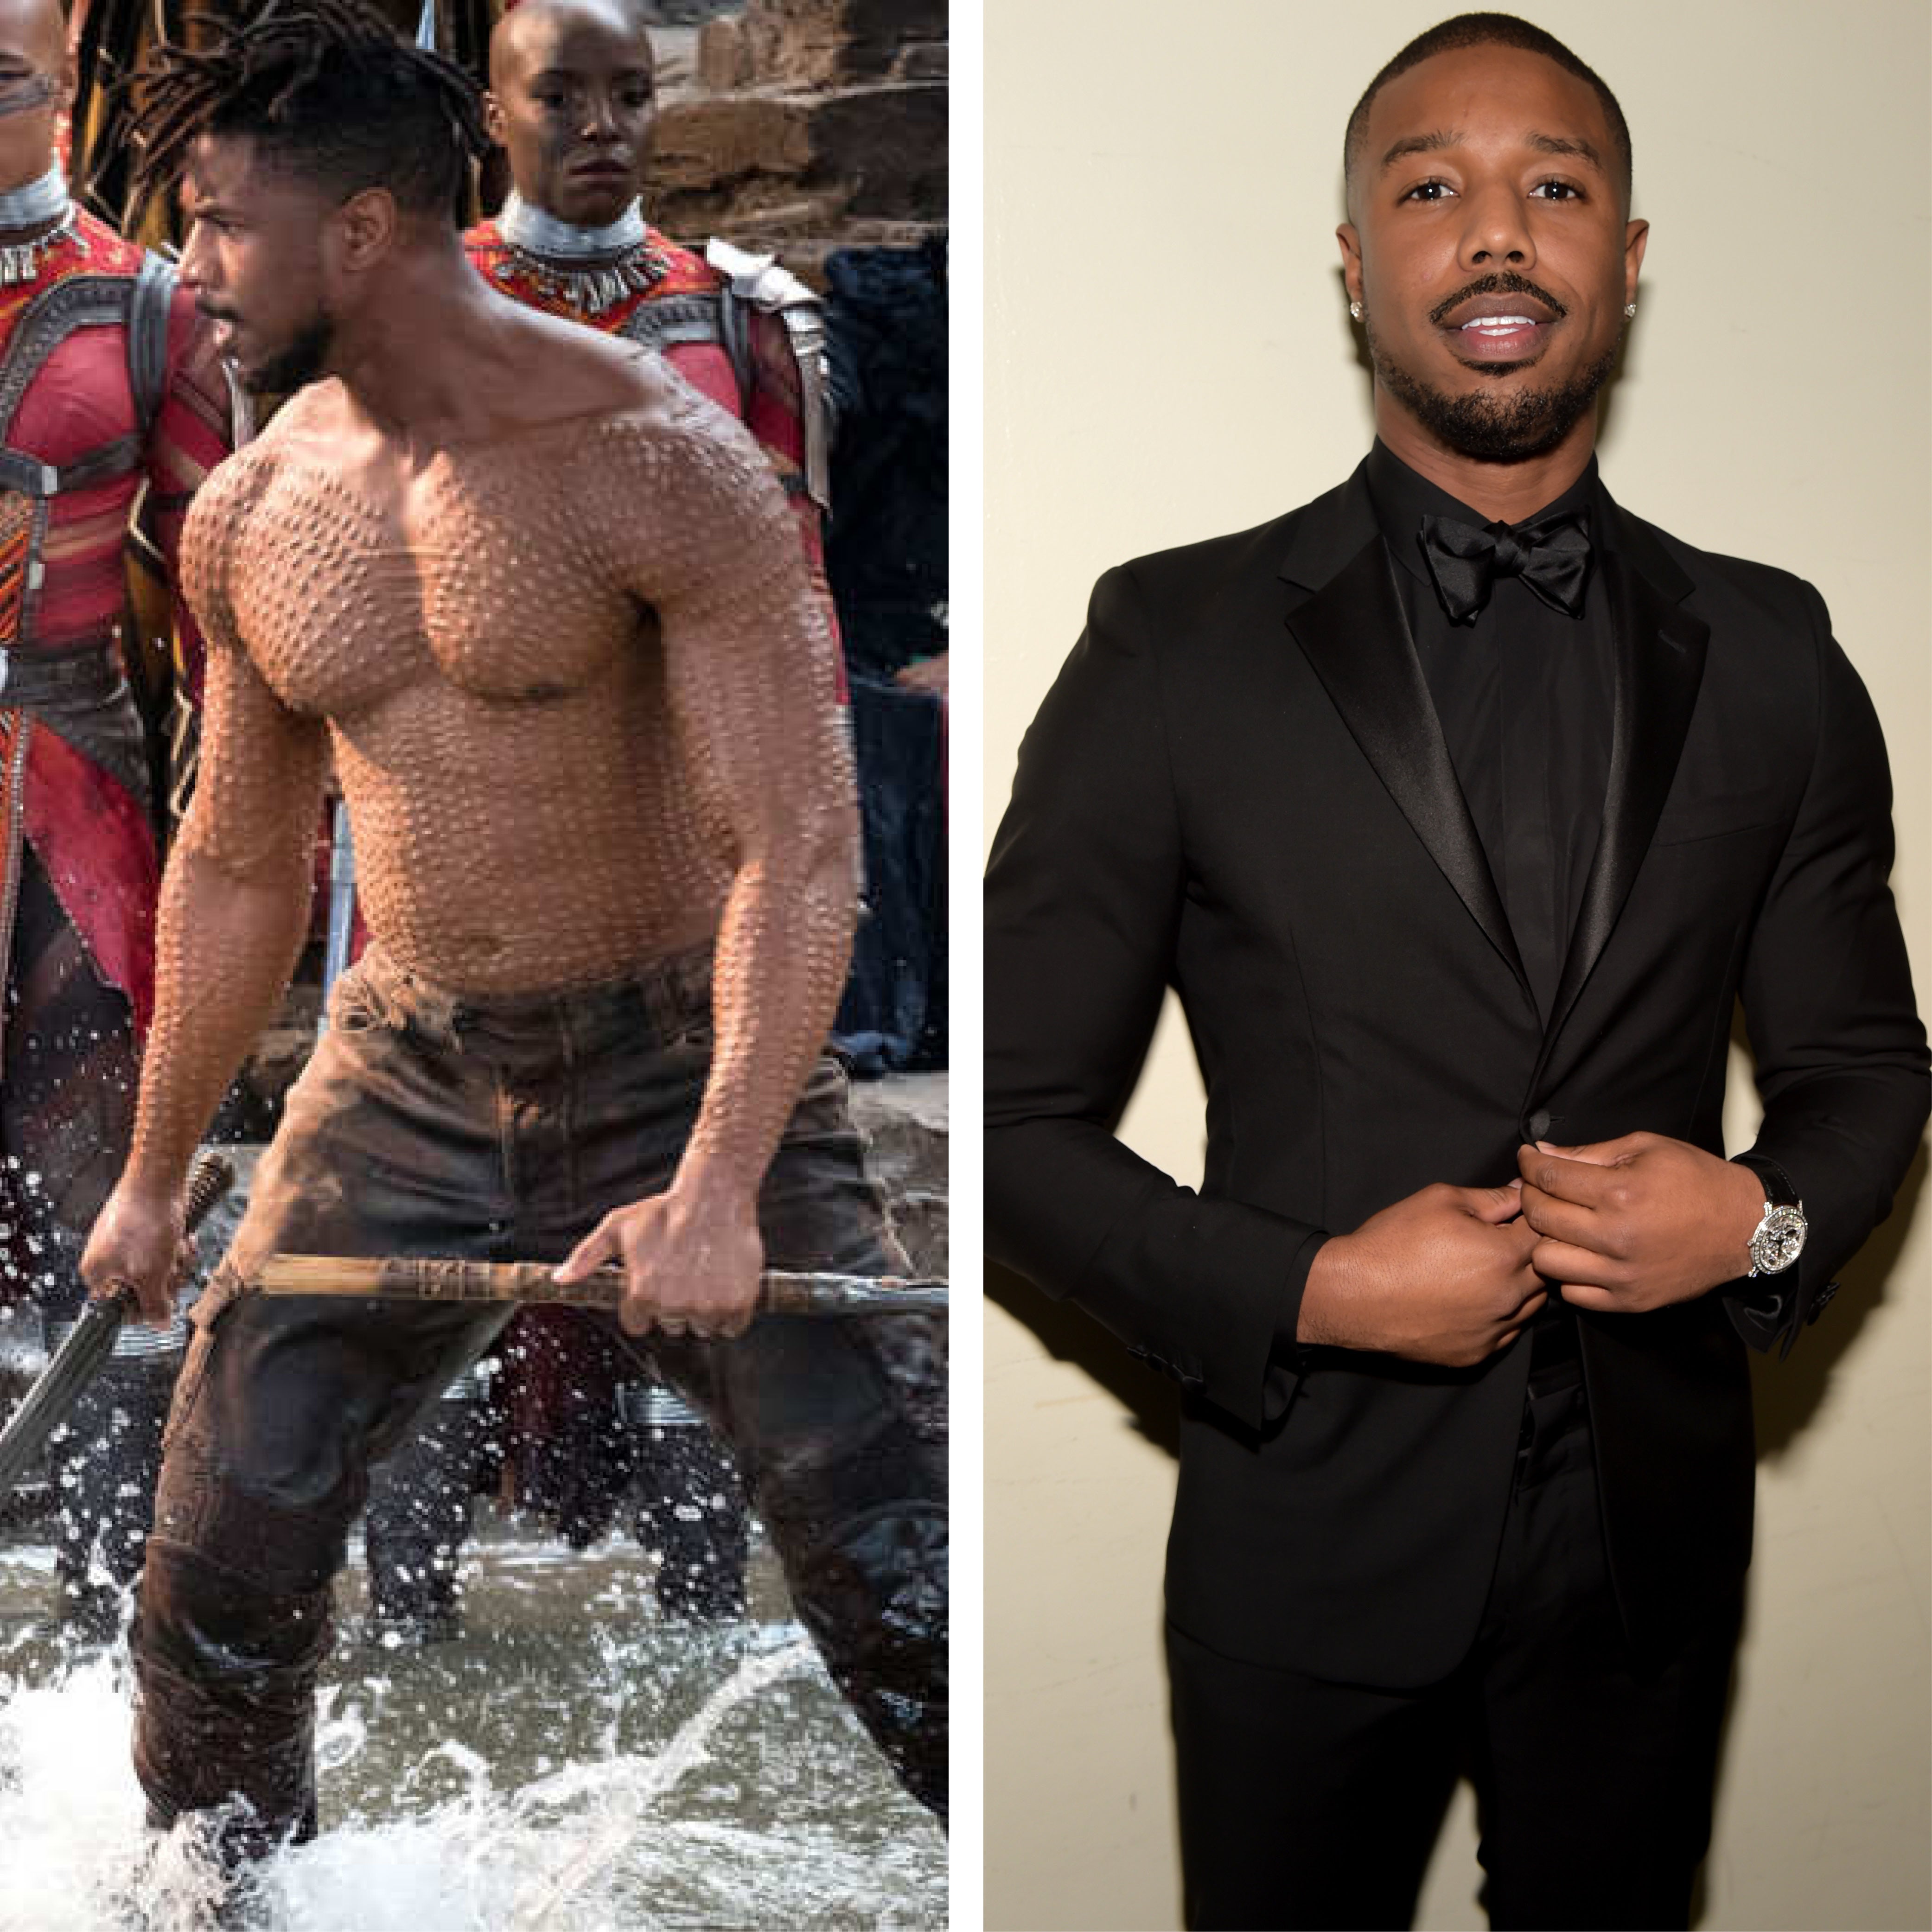 Wakanda Wikipedia: Who's Who In The 'Black Panther' Movie?
